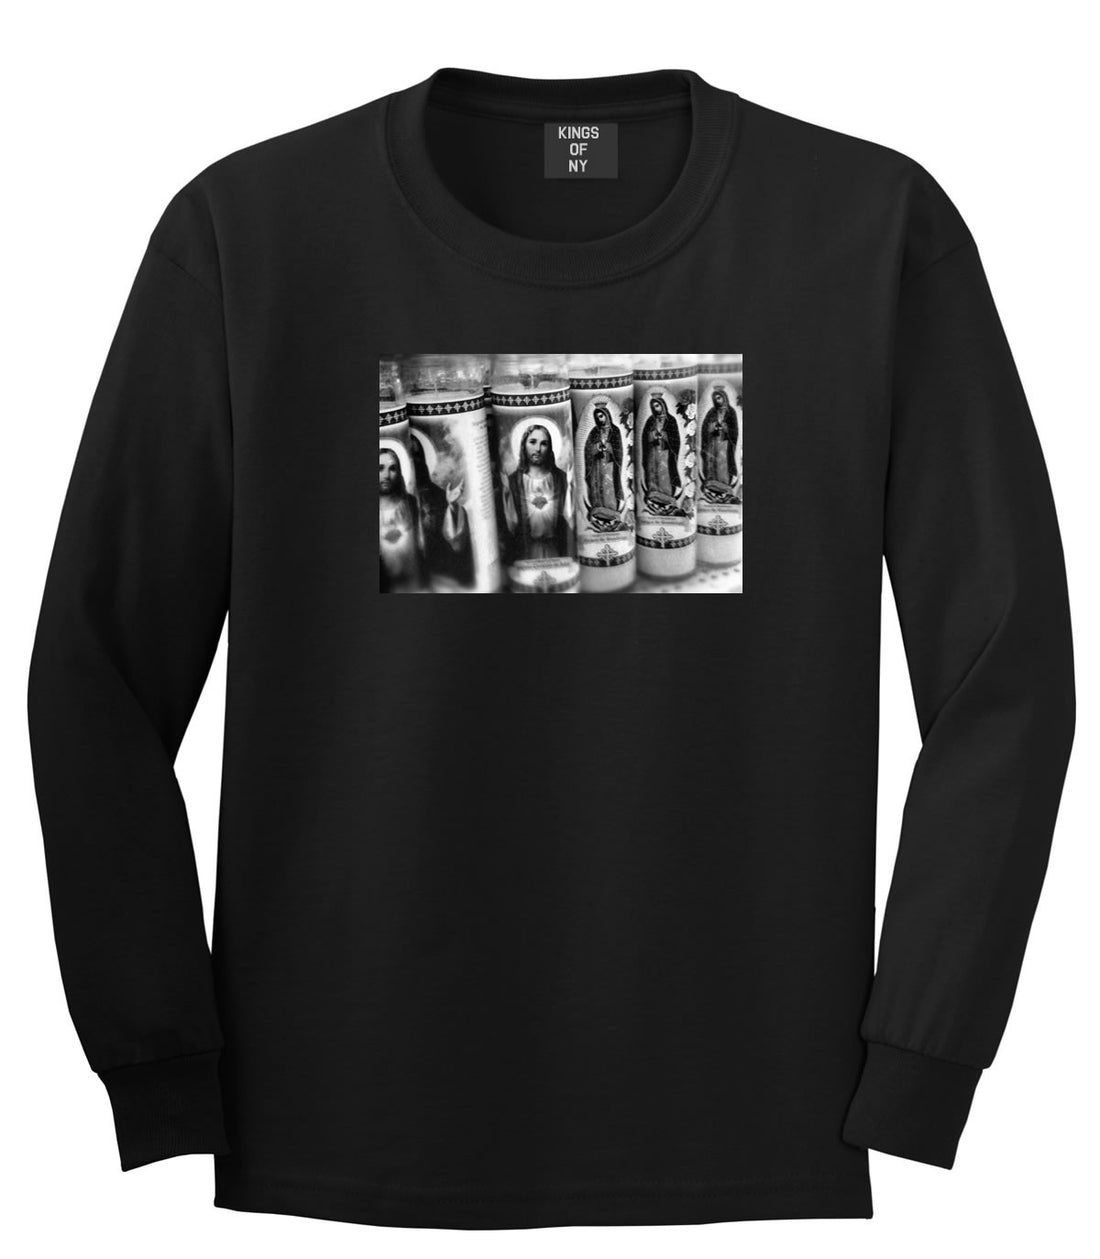 Candles Religious God Jesus Mary Fire NYC Long Sleeve Boys Kids T-Shirt In Black by Kings Of NY